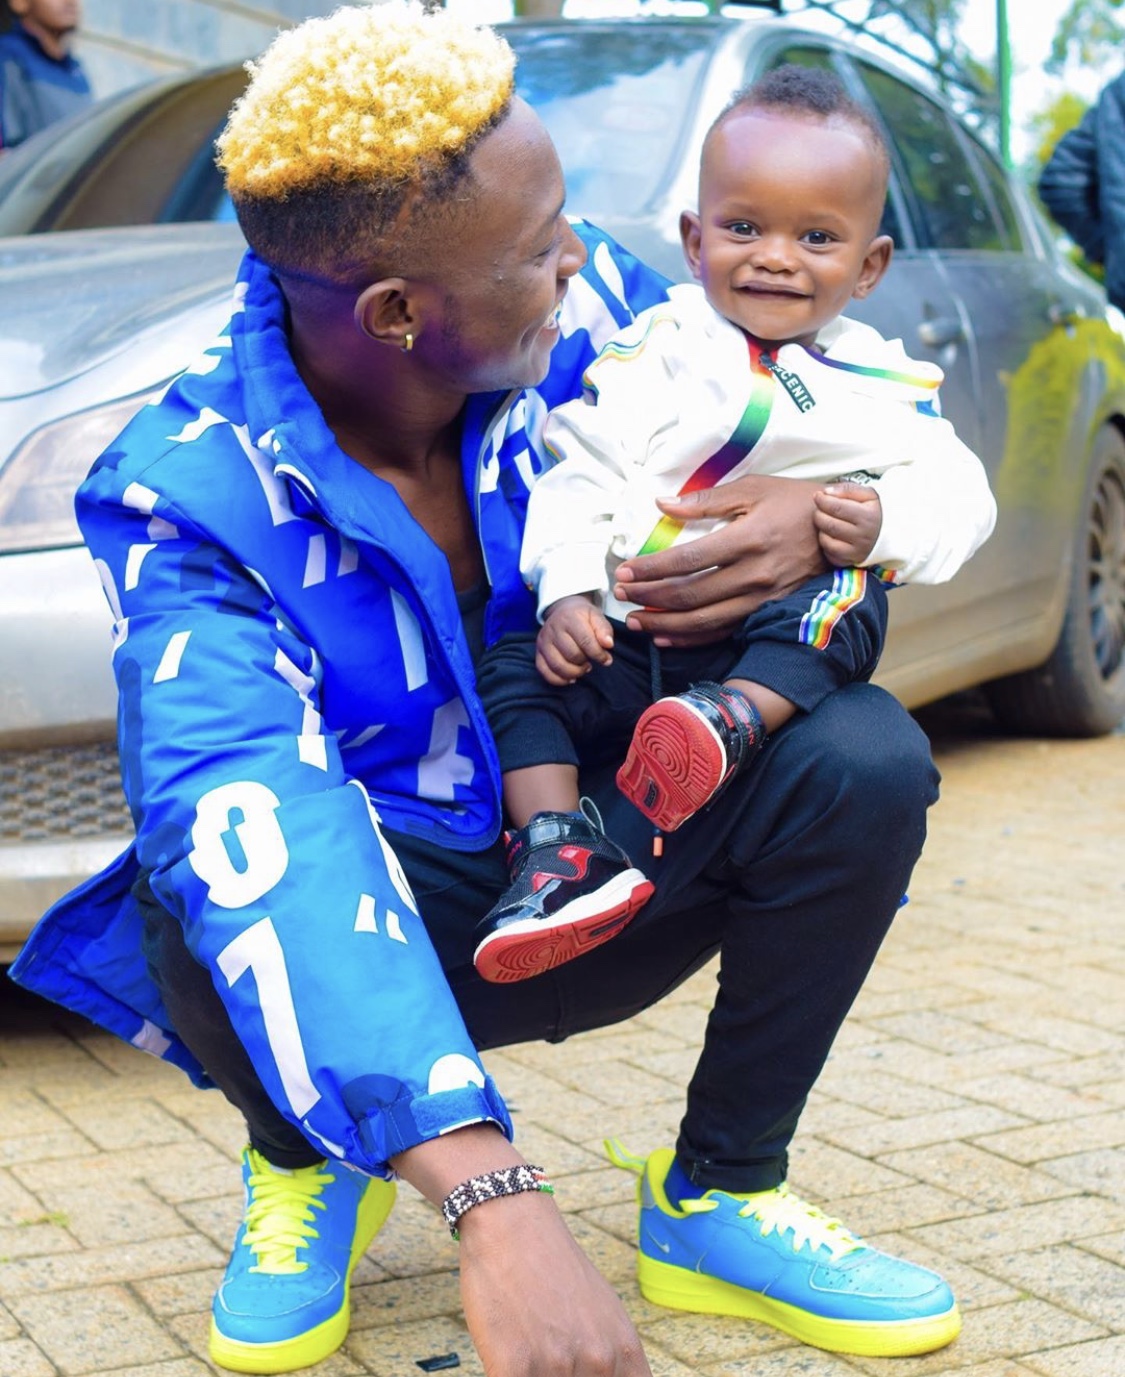 Mr Seed´s toddler son lands brand ambassadorial deal, barely months after unveiling his face